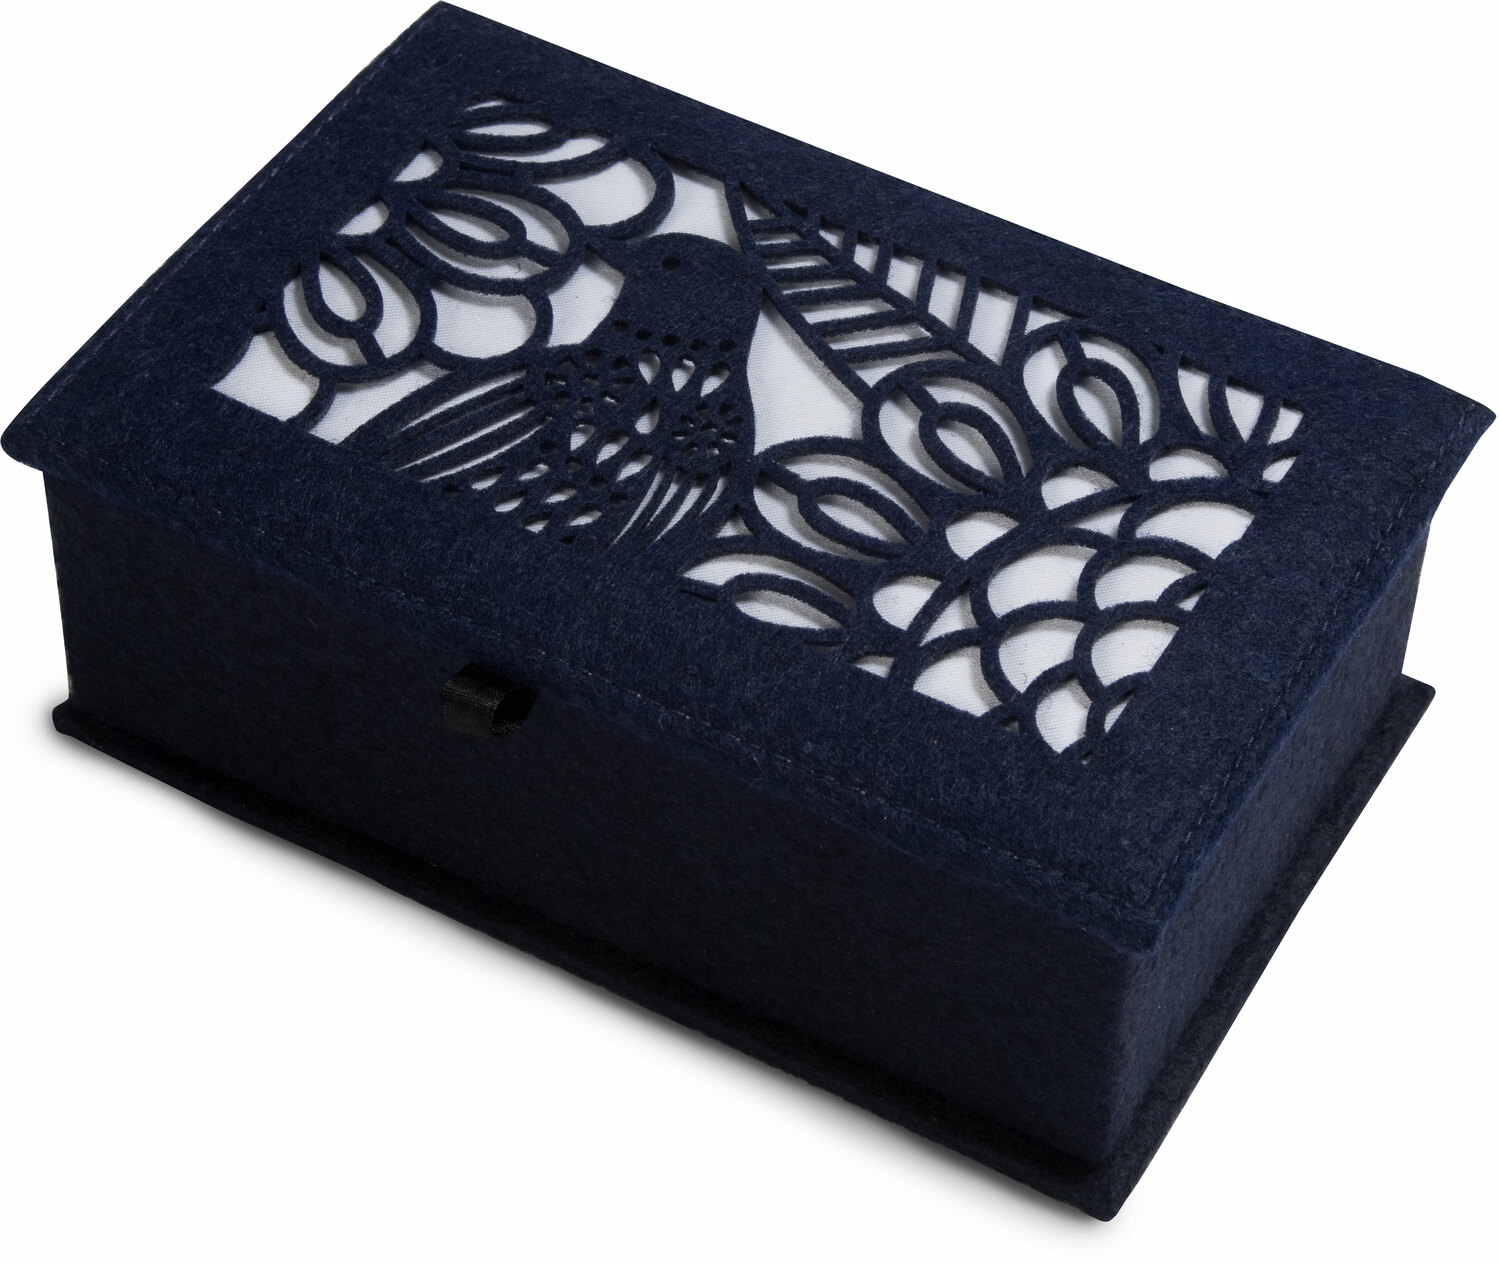 Navy and Ivory by H2Z Felt Accessories - Navy and Ivory - 7.75" x 5" x 2.75" Small Jewelry Box